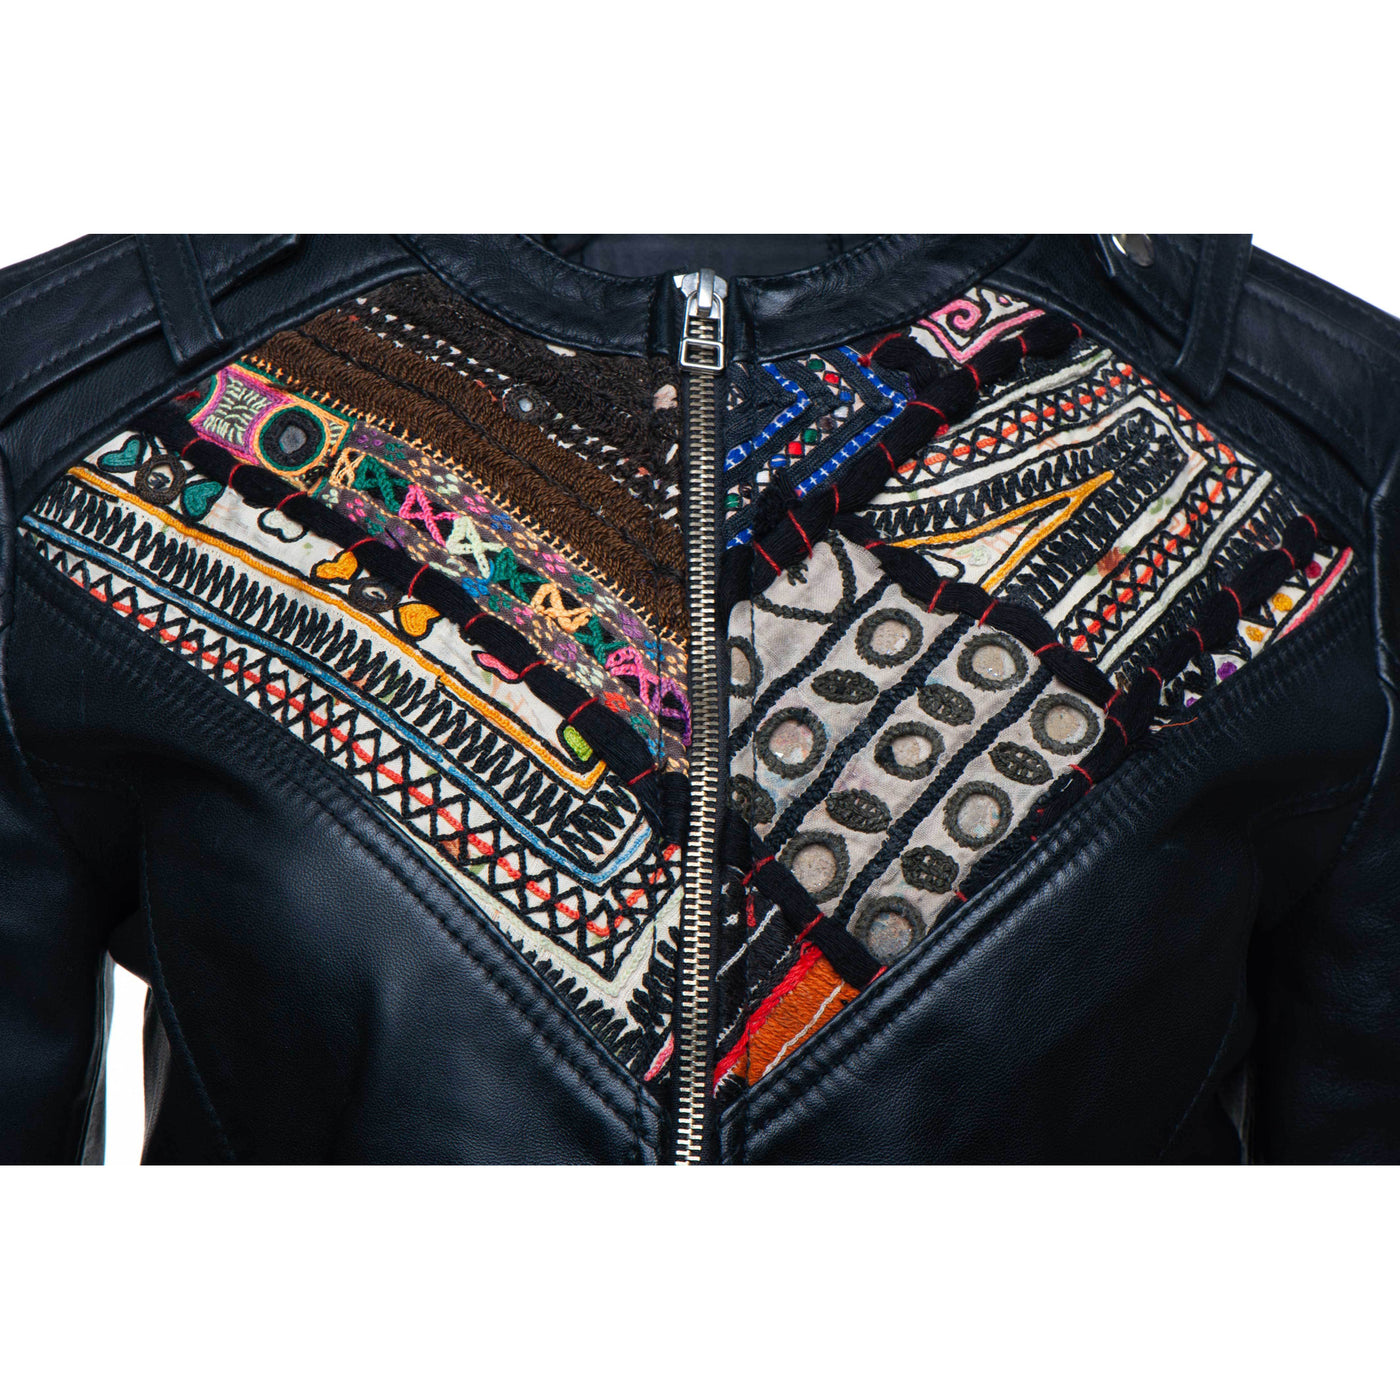 Fashionable Delilah's tribal Hand Embroidered chic leather jacket